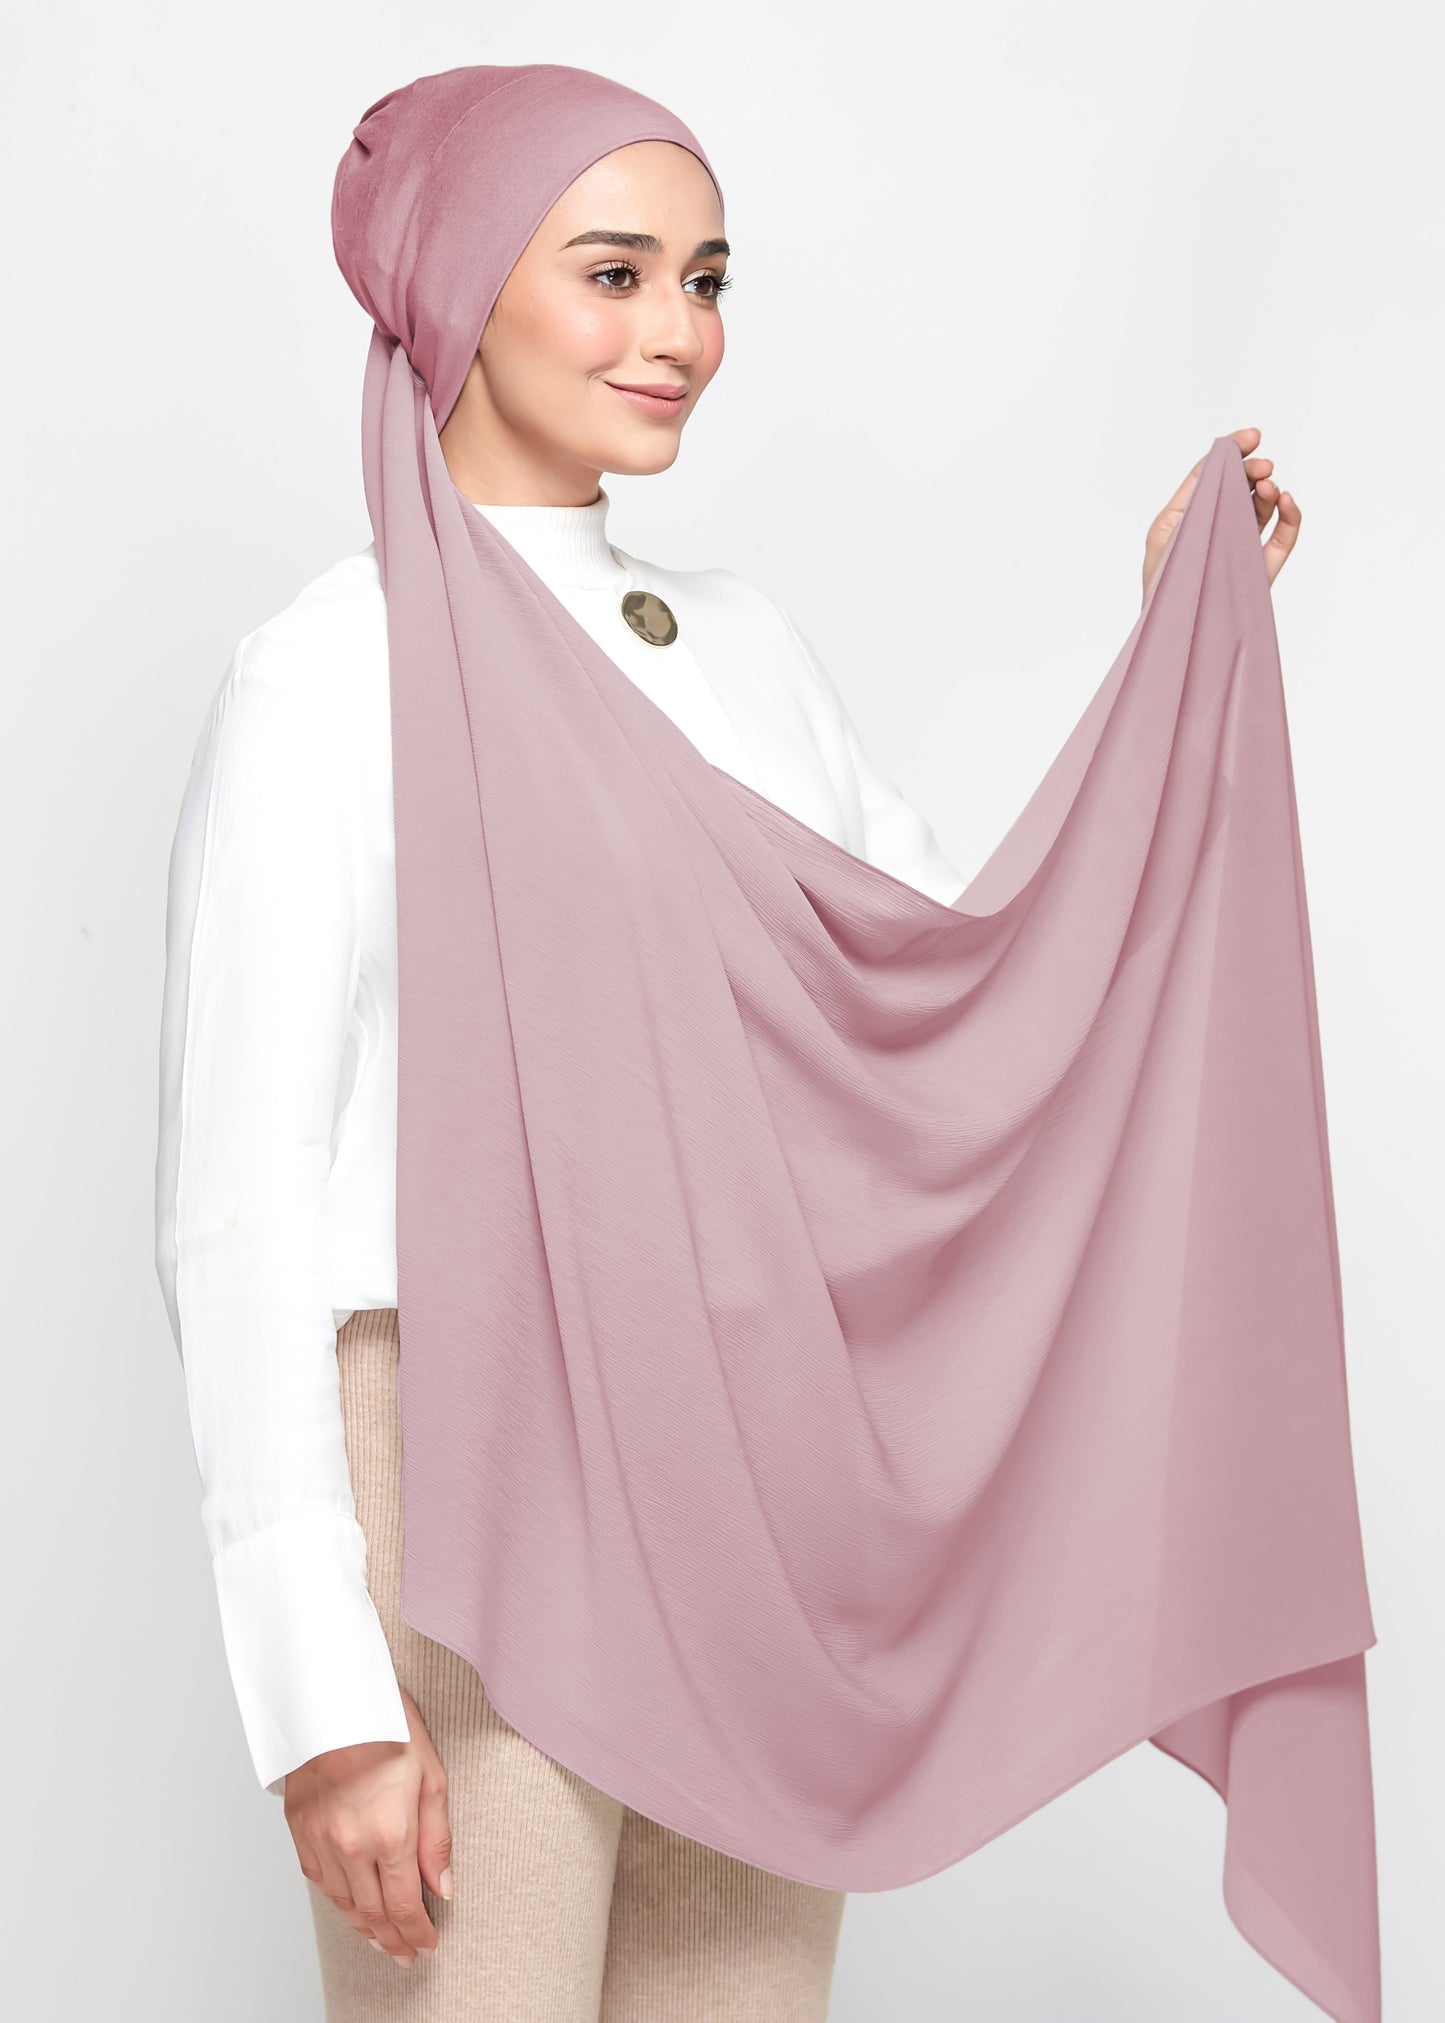 Chiffon Dolce in Sorbet Berry